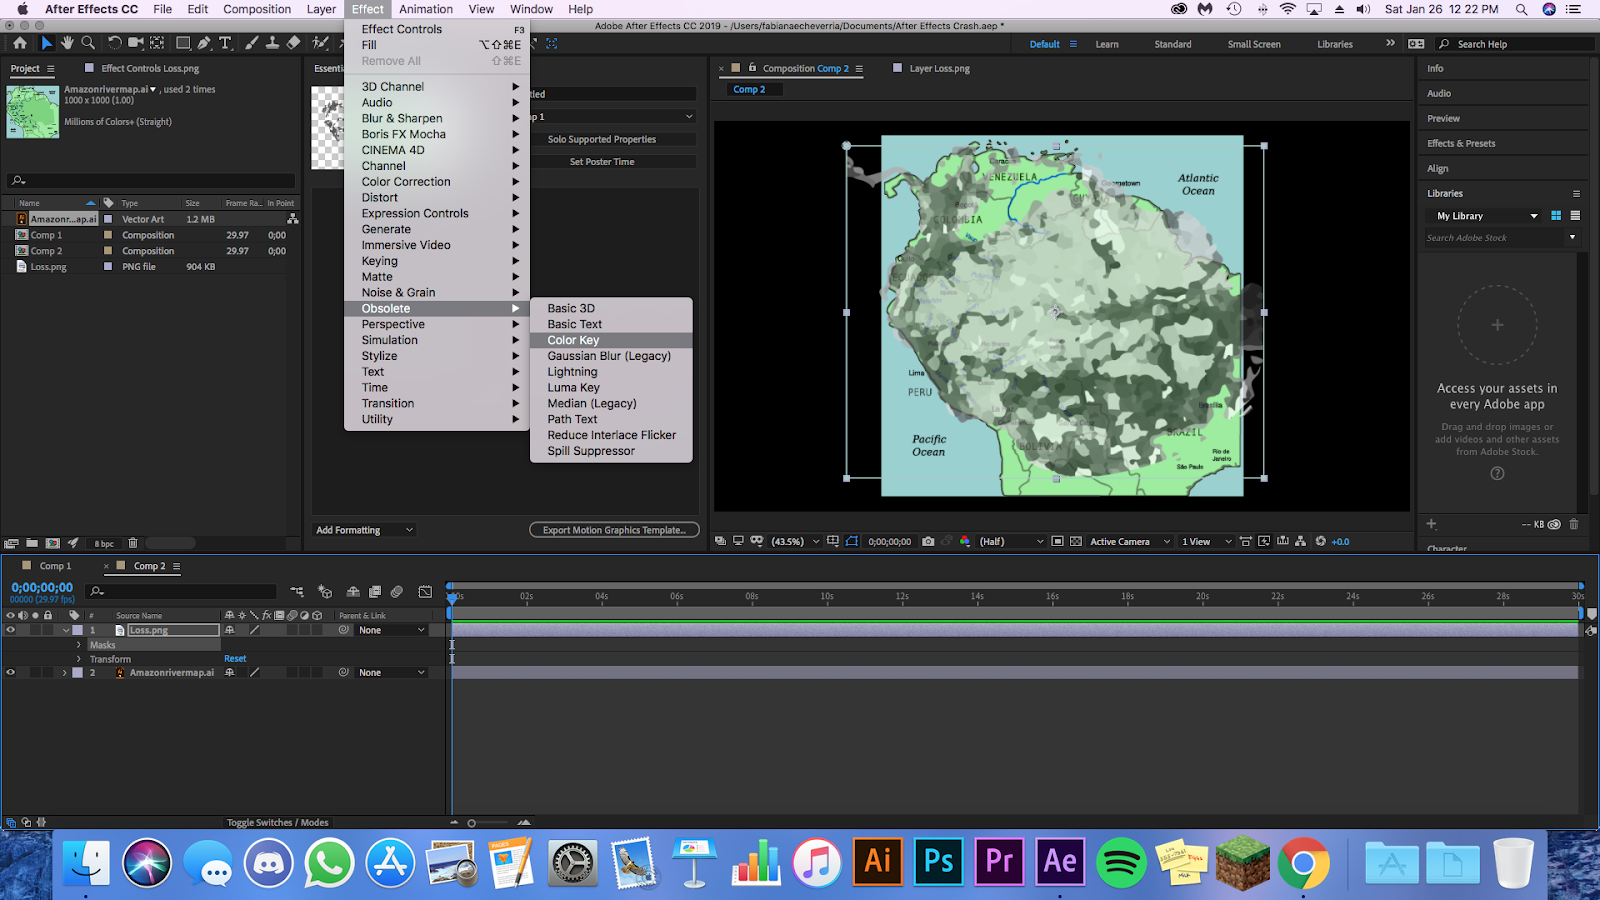 How to animate a map in Adobe After Effects – storybench